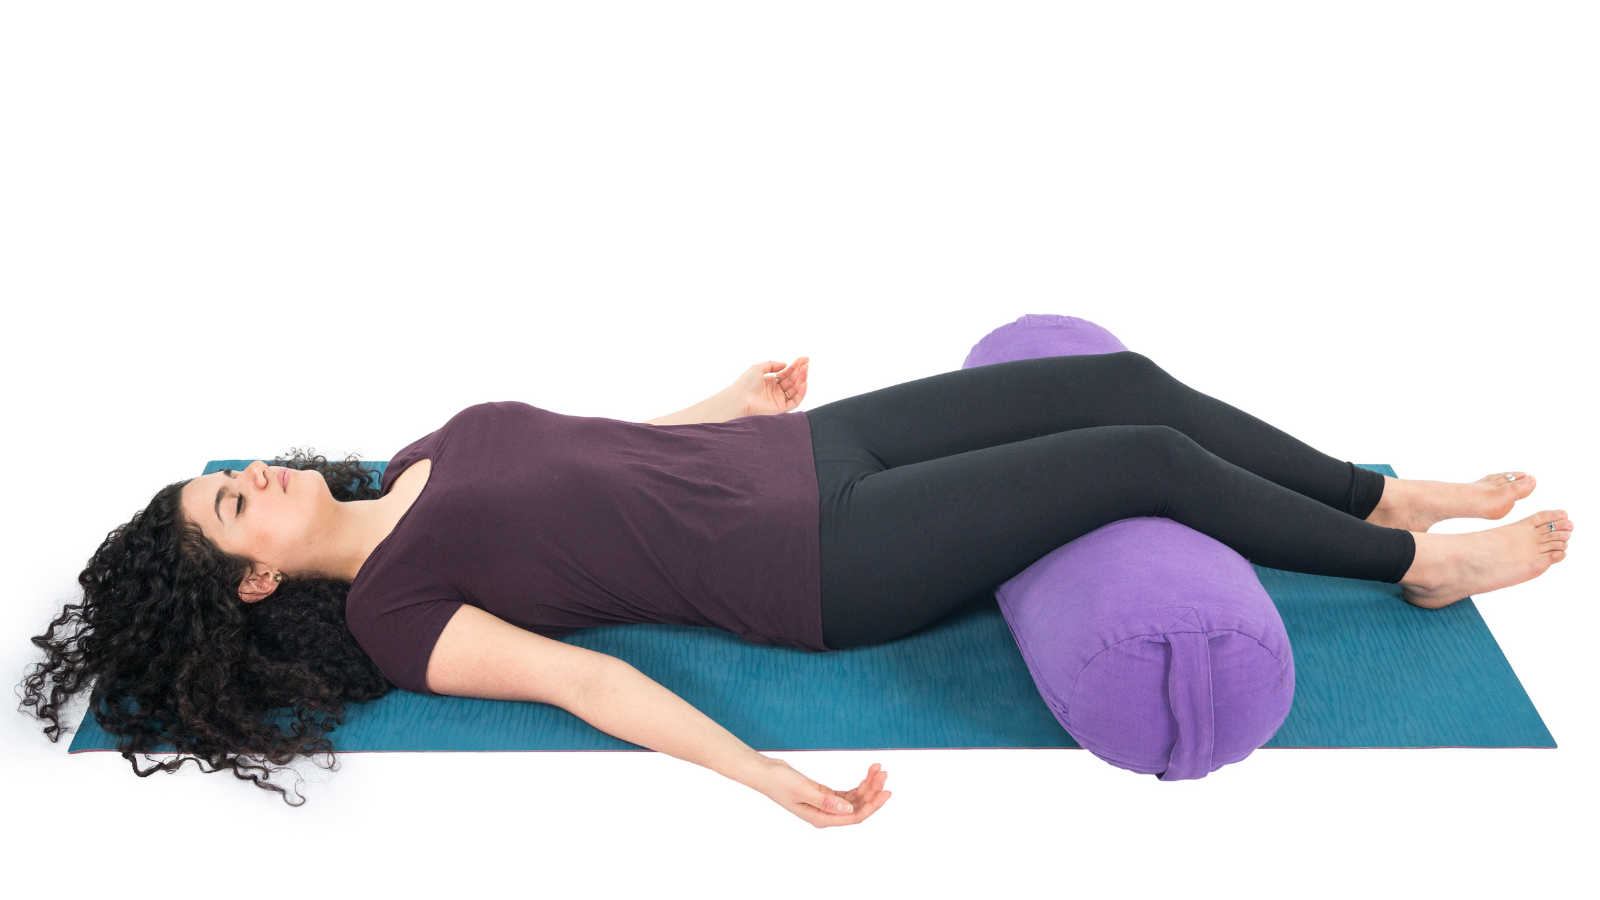 Corpse Pose or Savasana practiced with Bolster supporting the knees